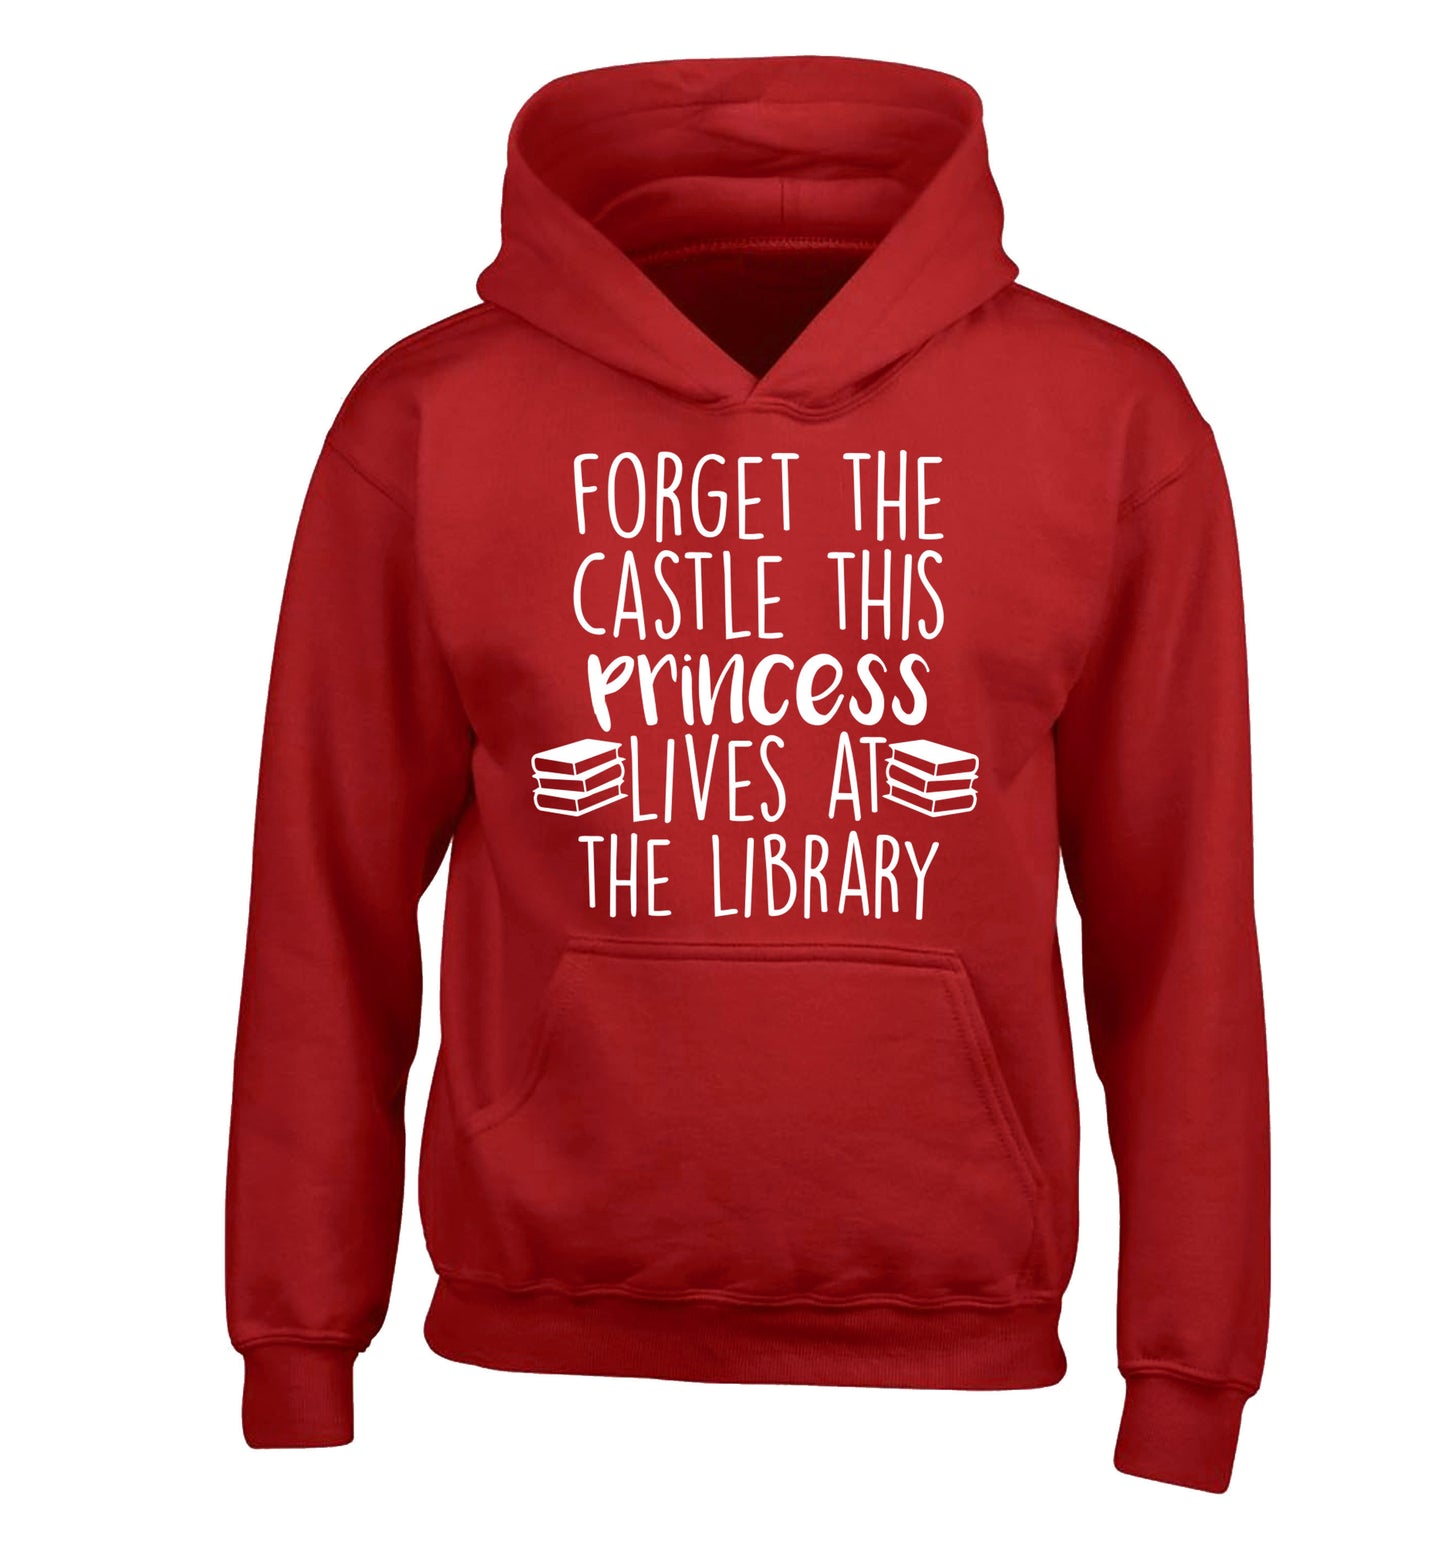 Forget the castle this princess lives at the library children's red hoodie 12-14 Years